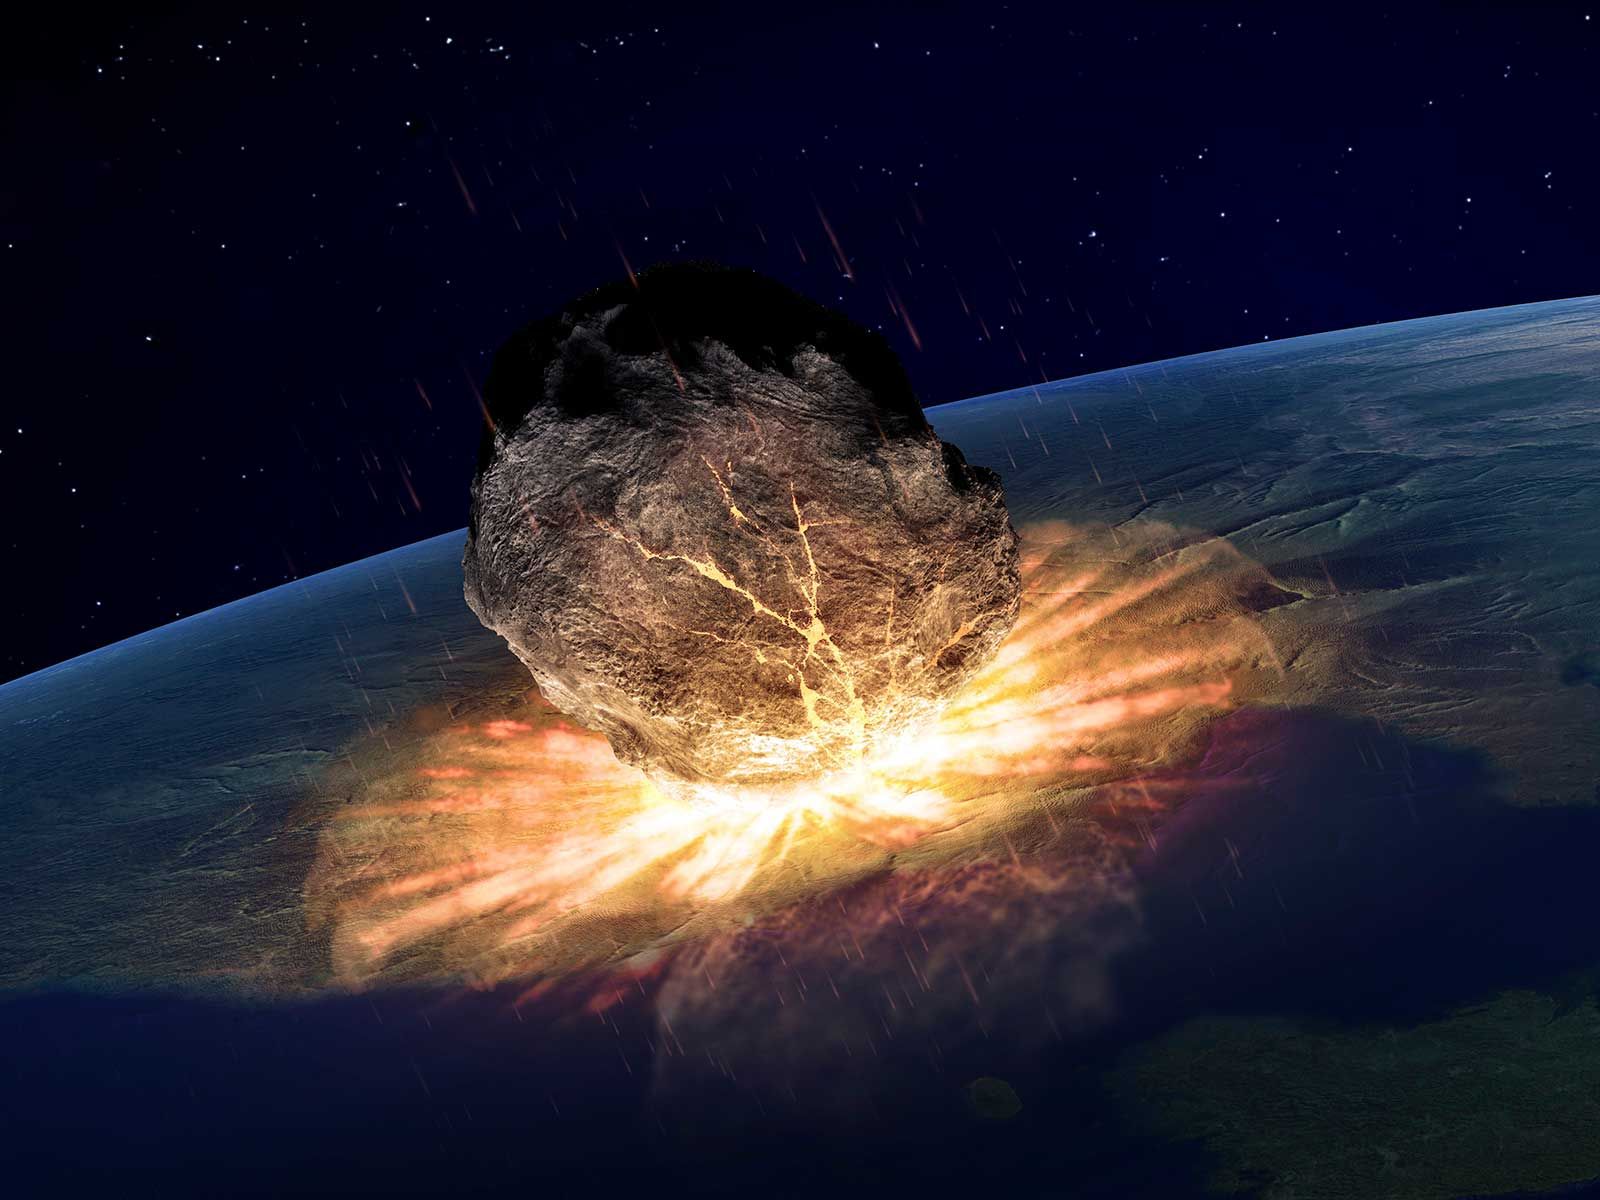 asteroid impact craters on earth